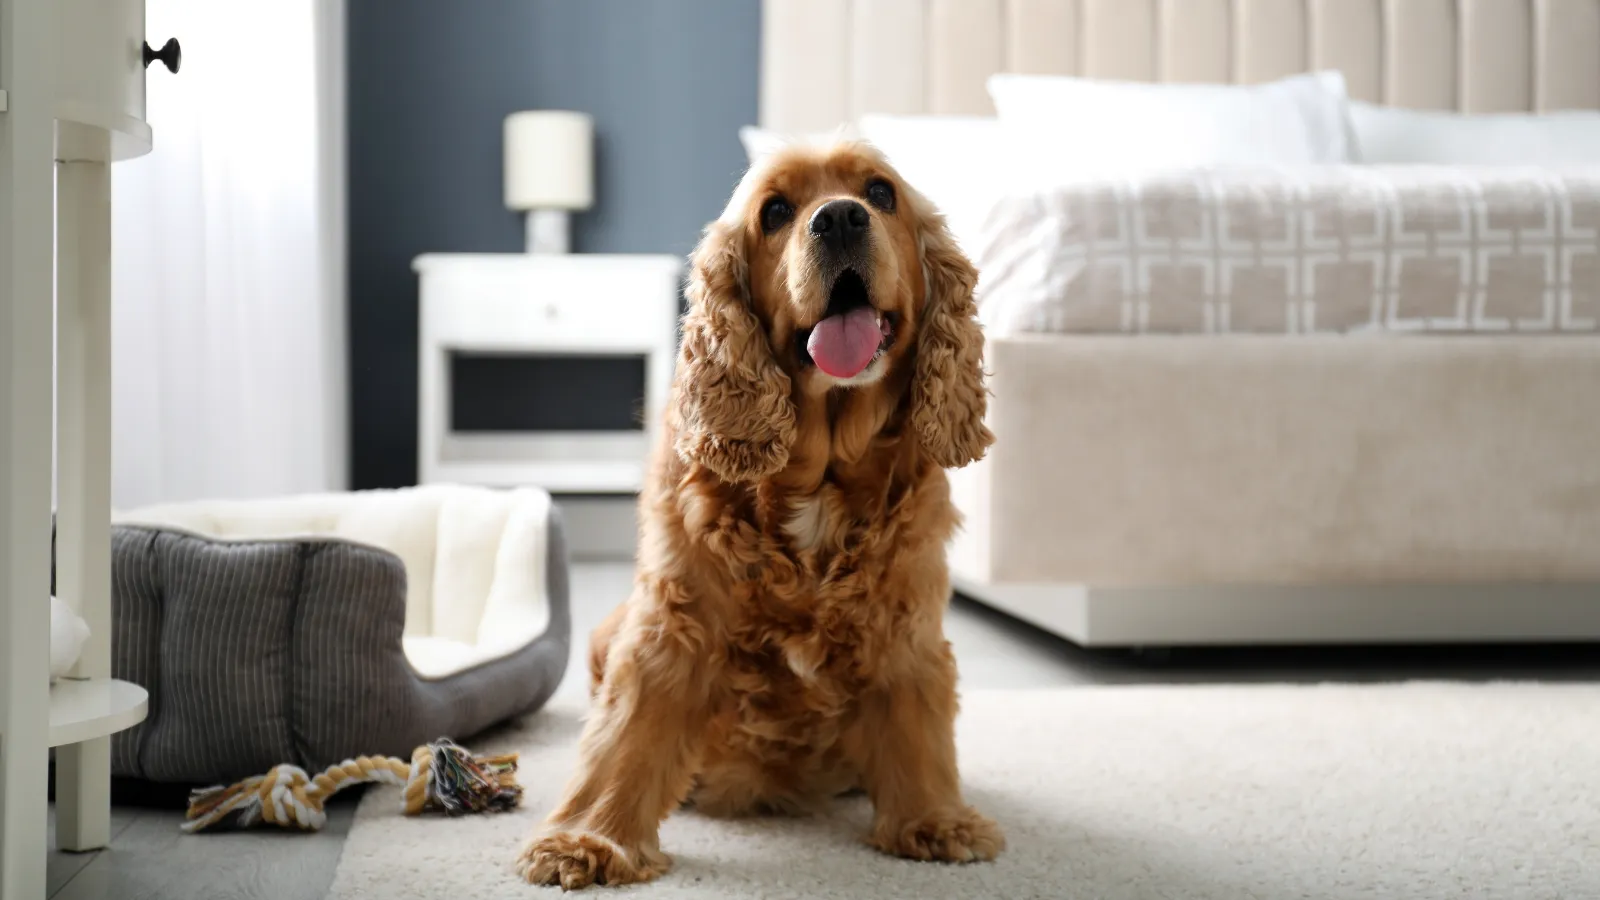 Research Services Offered - Checklist for Choosing the Right Dog Hotel for Your Pet